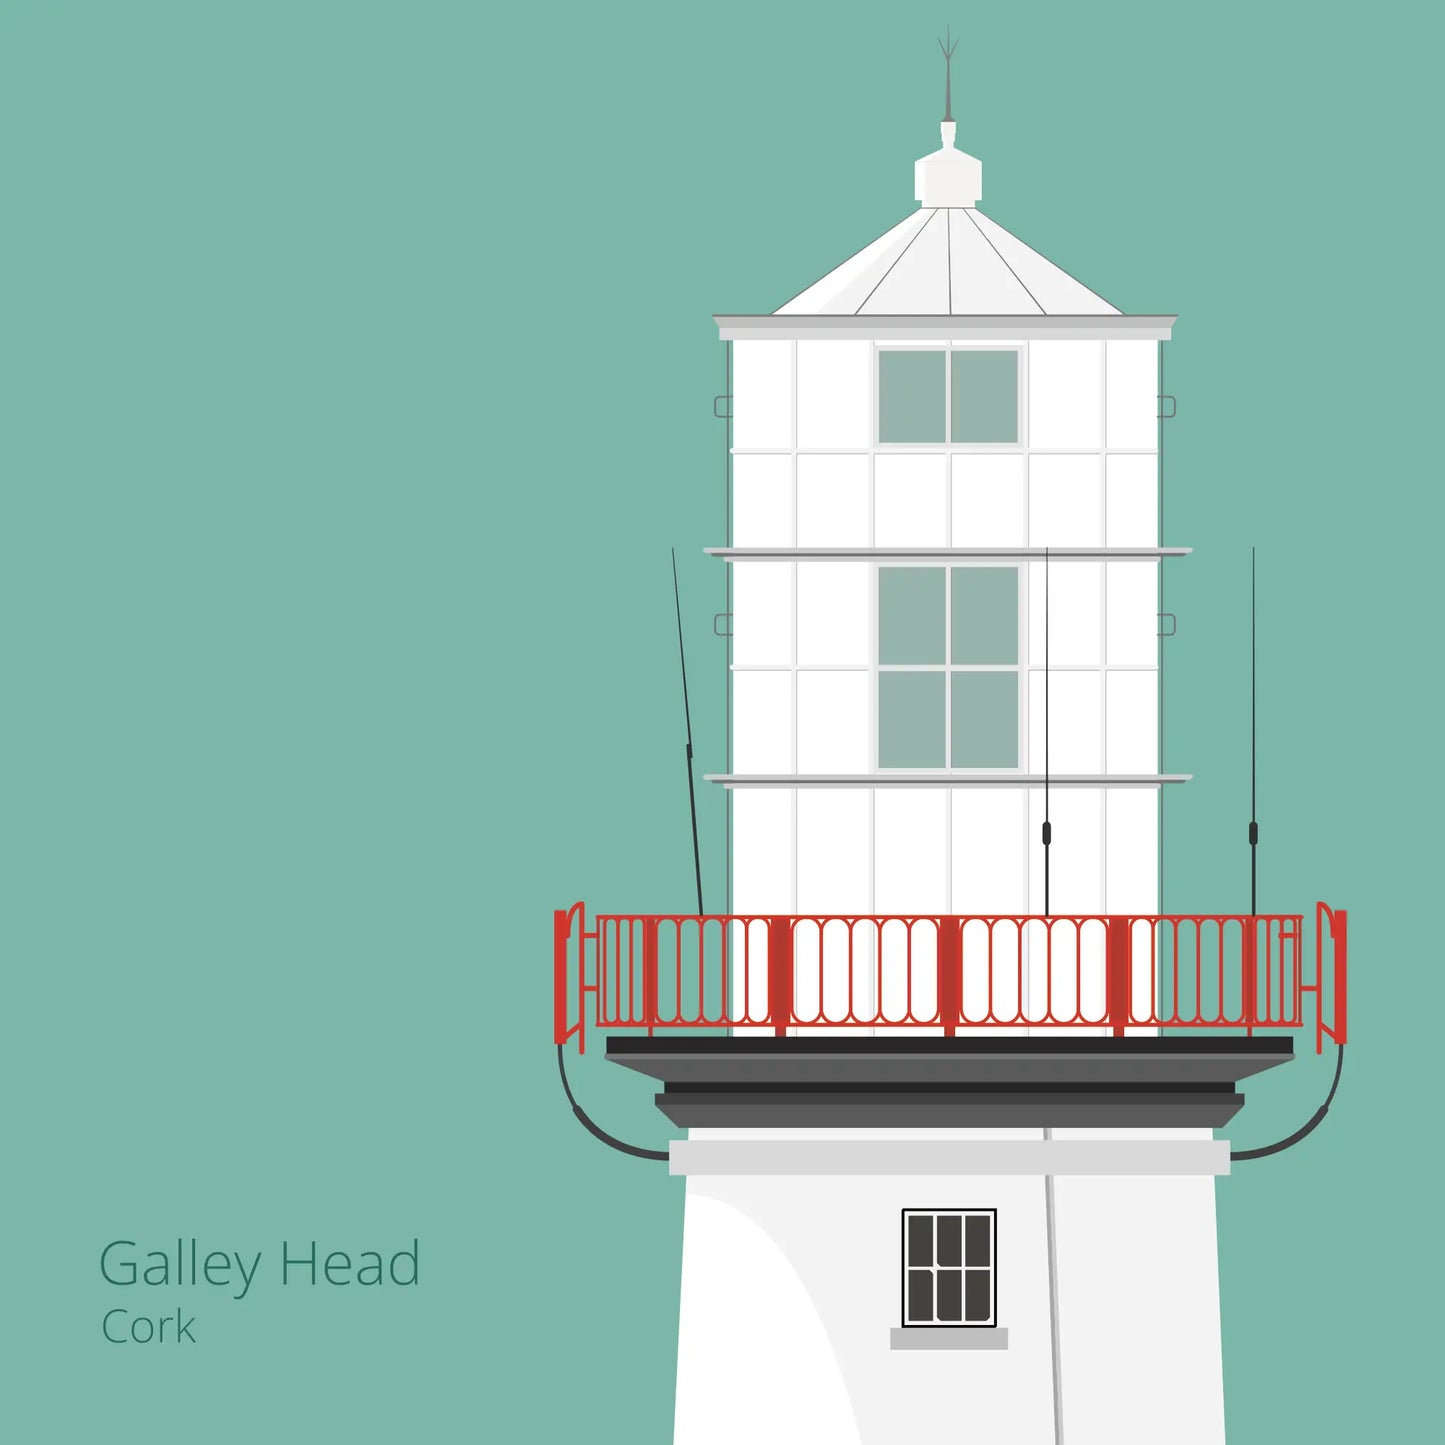 Illustration of Galley Head lighthouse on an ocean green background